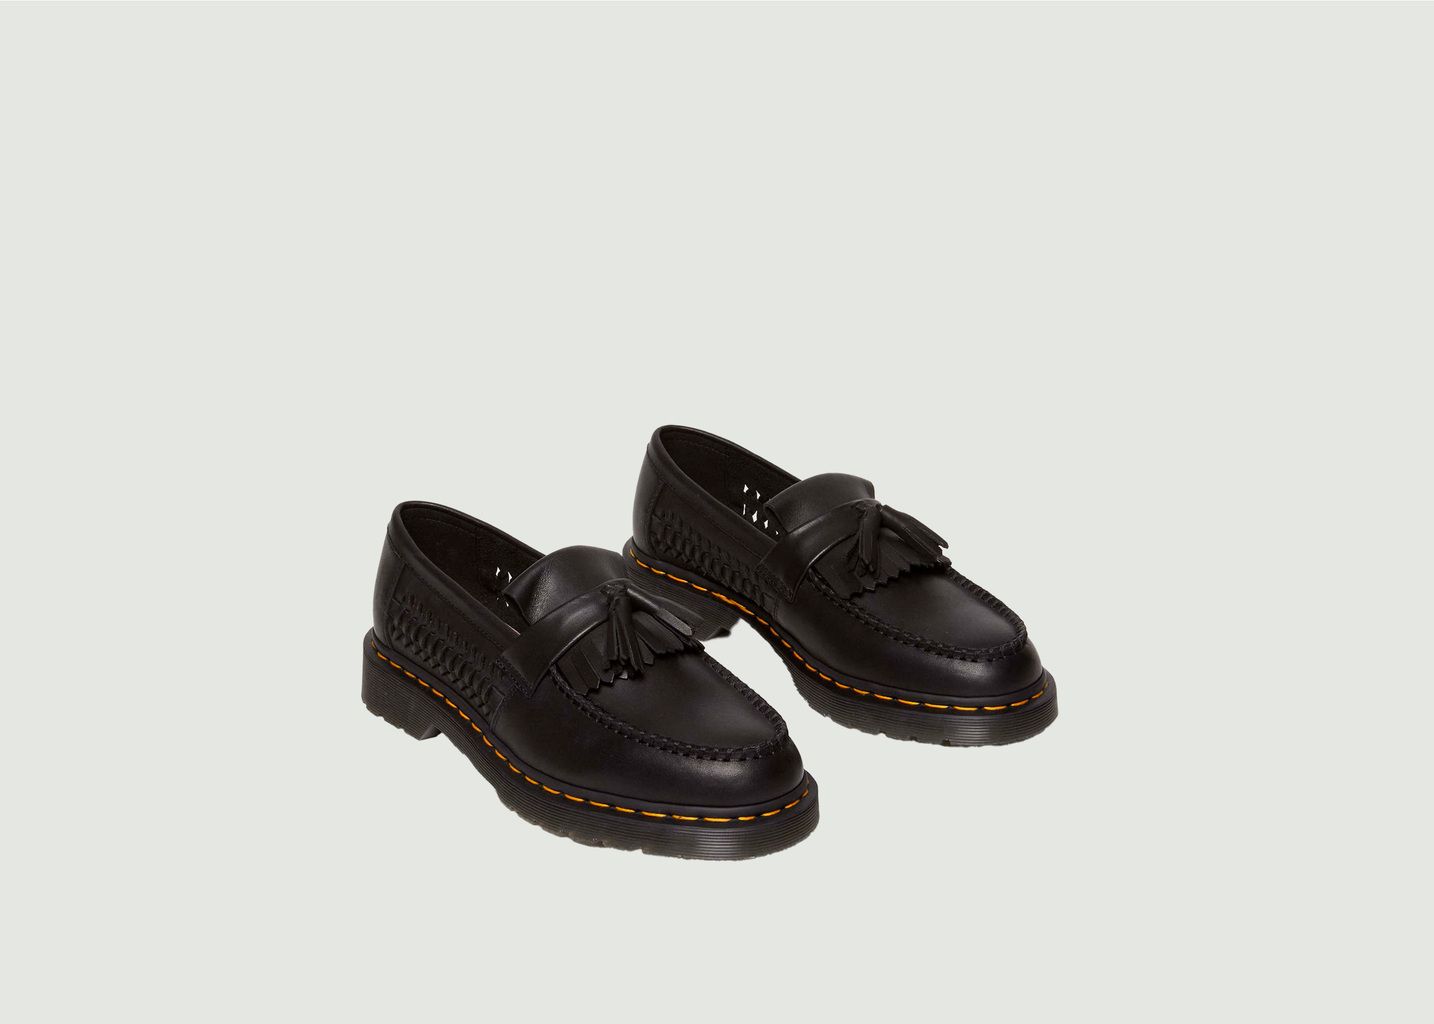 Adrian Woven loafer  - Dr. Martens